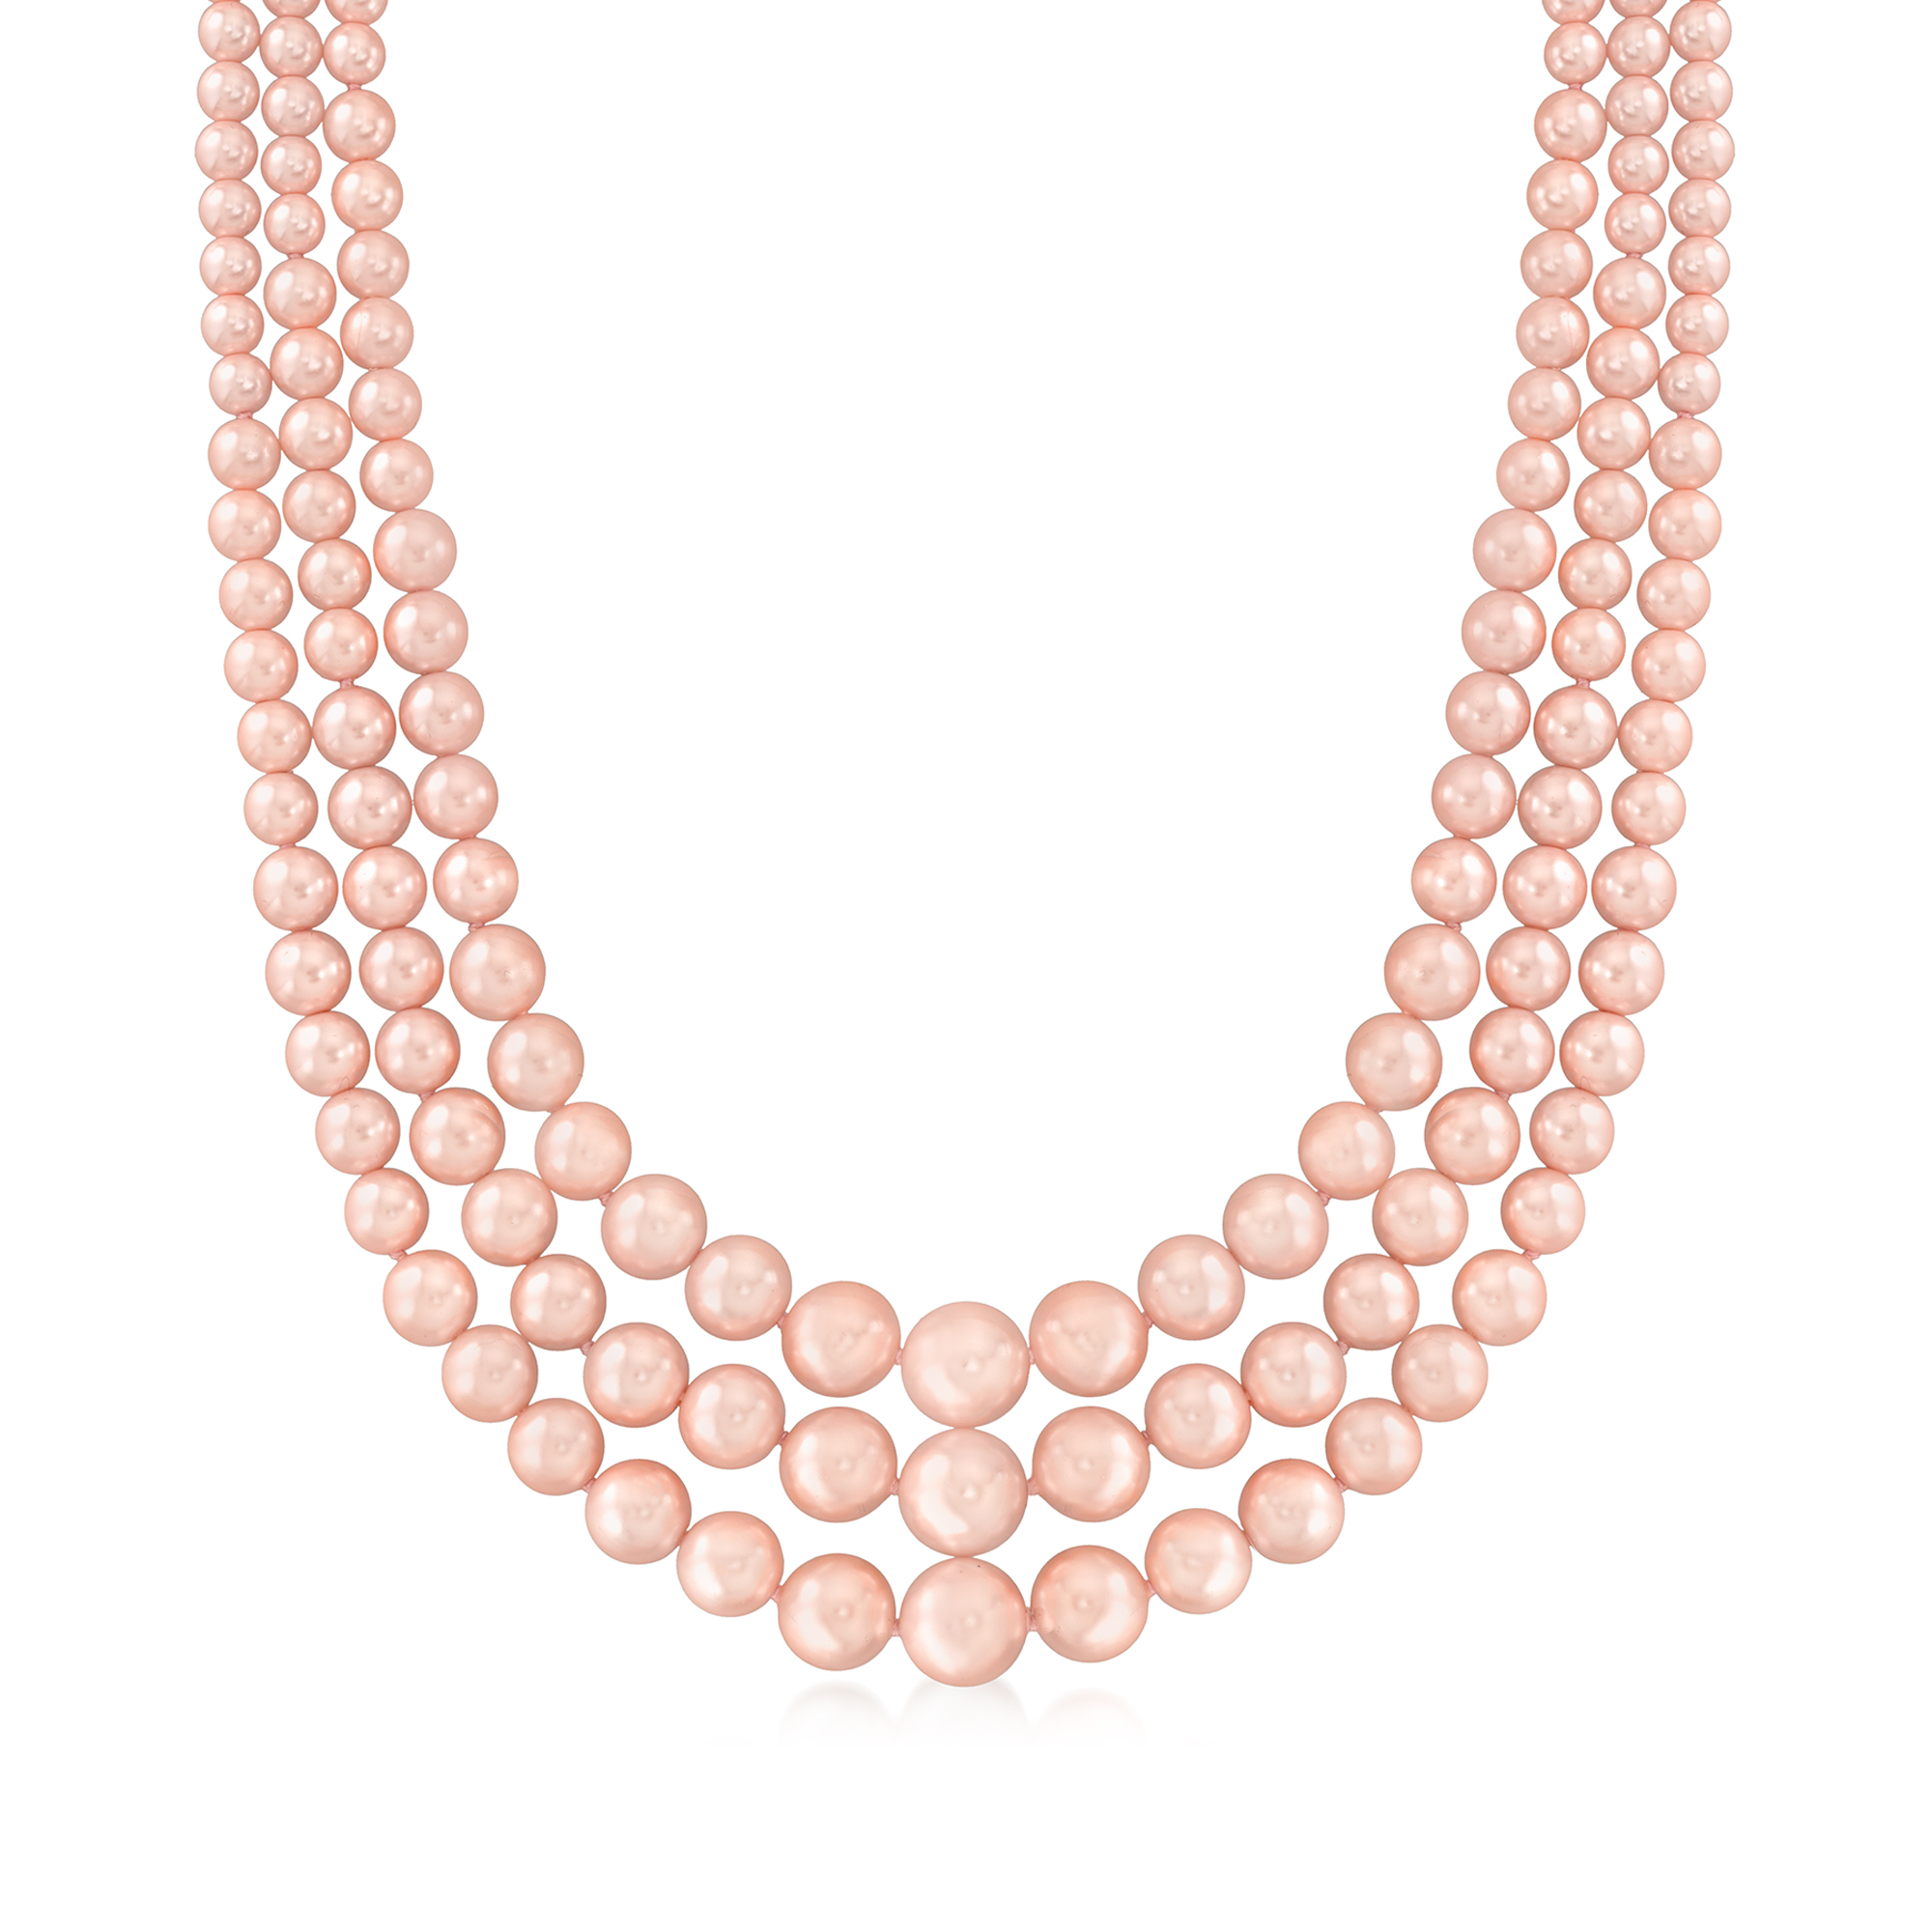 6-12mm Pink Shell Pearl Three-Strand Necklace with Sterling Silver. 18